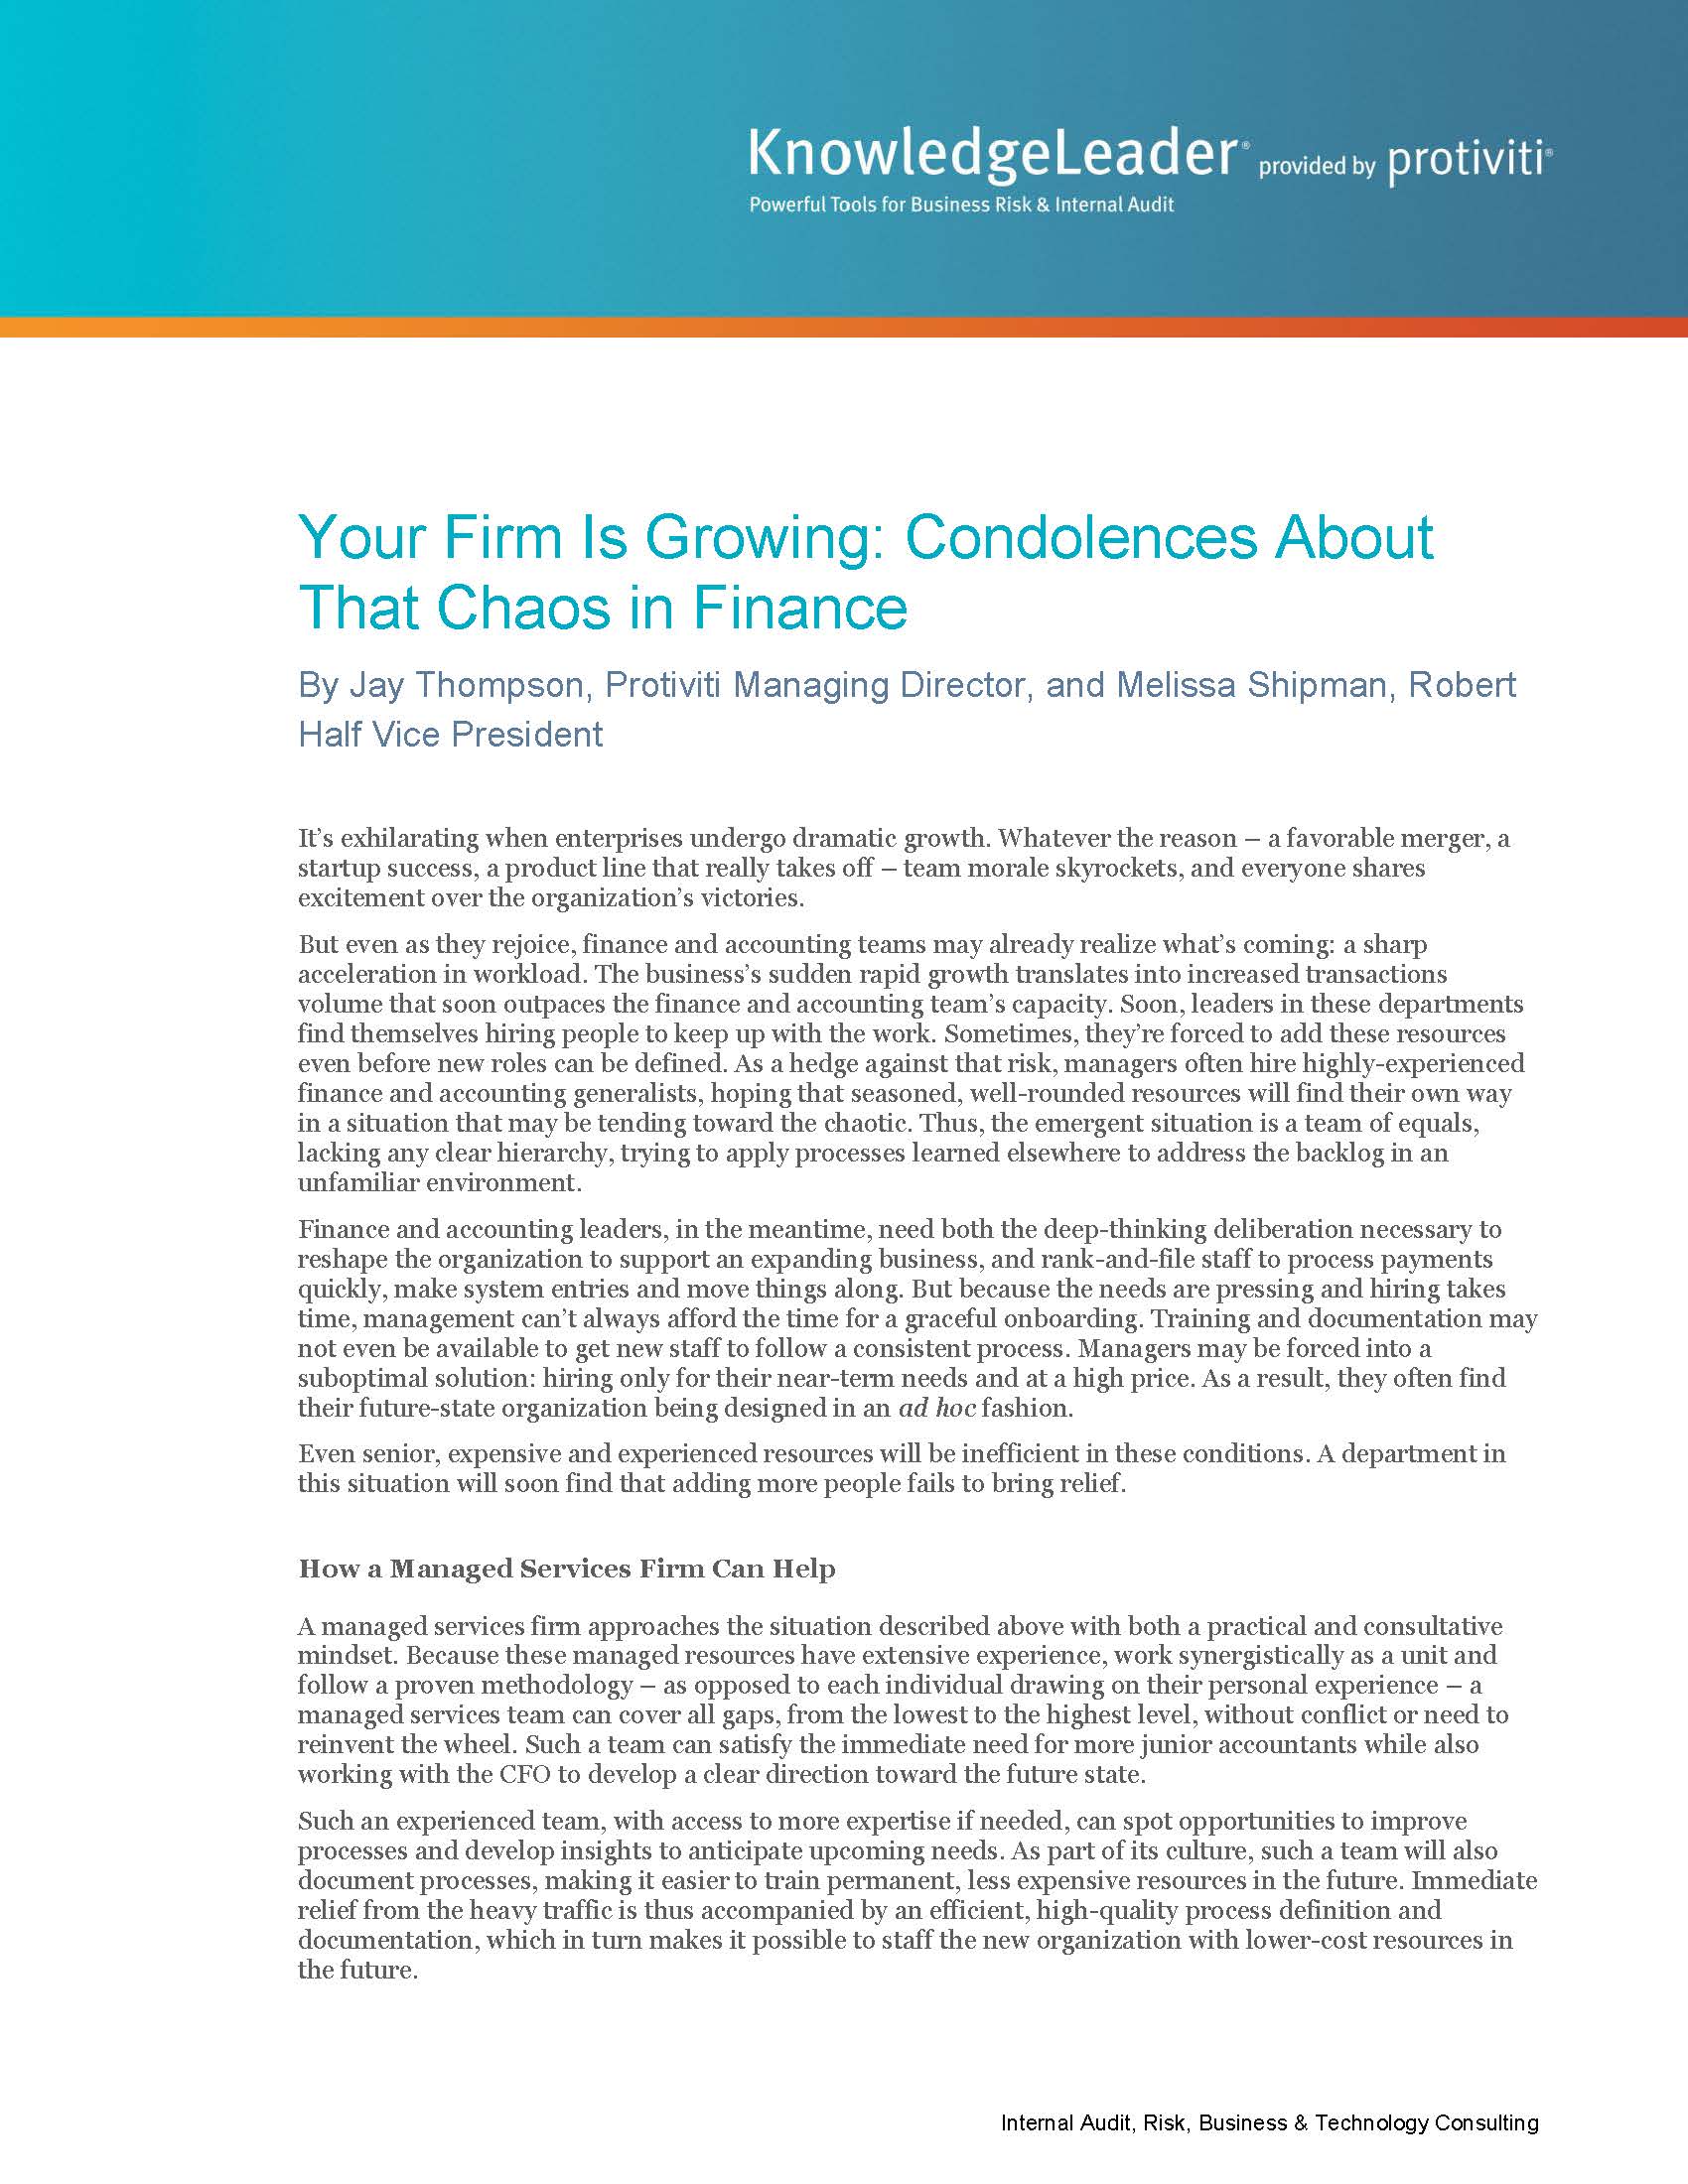 Screenshot of the first page of Your Firm Is Growing: Condolences About That Chaos in Finance